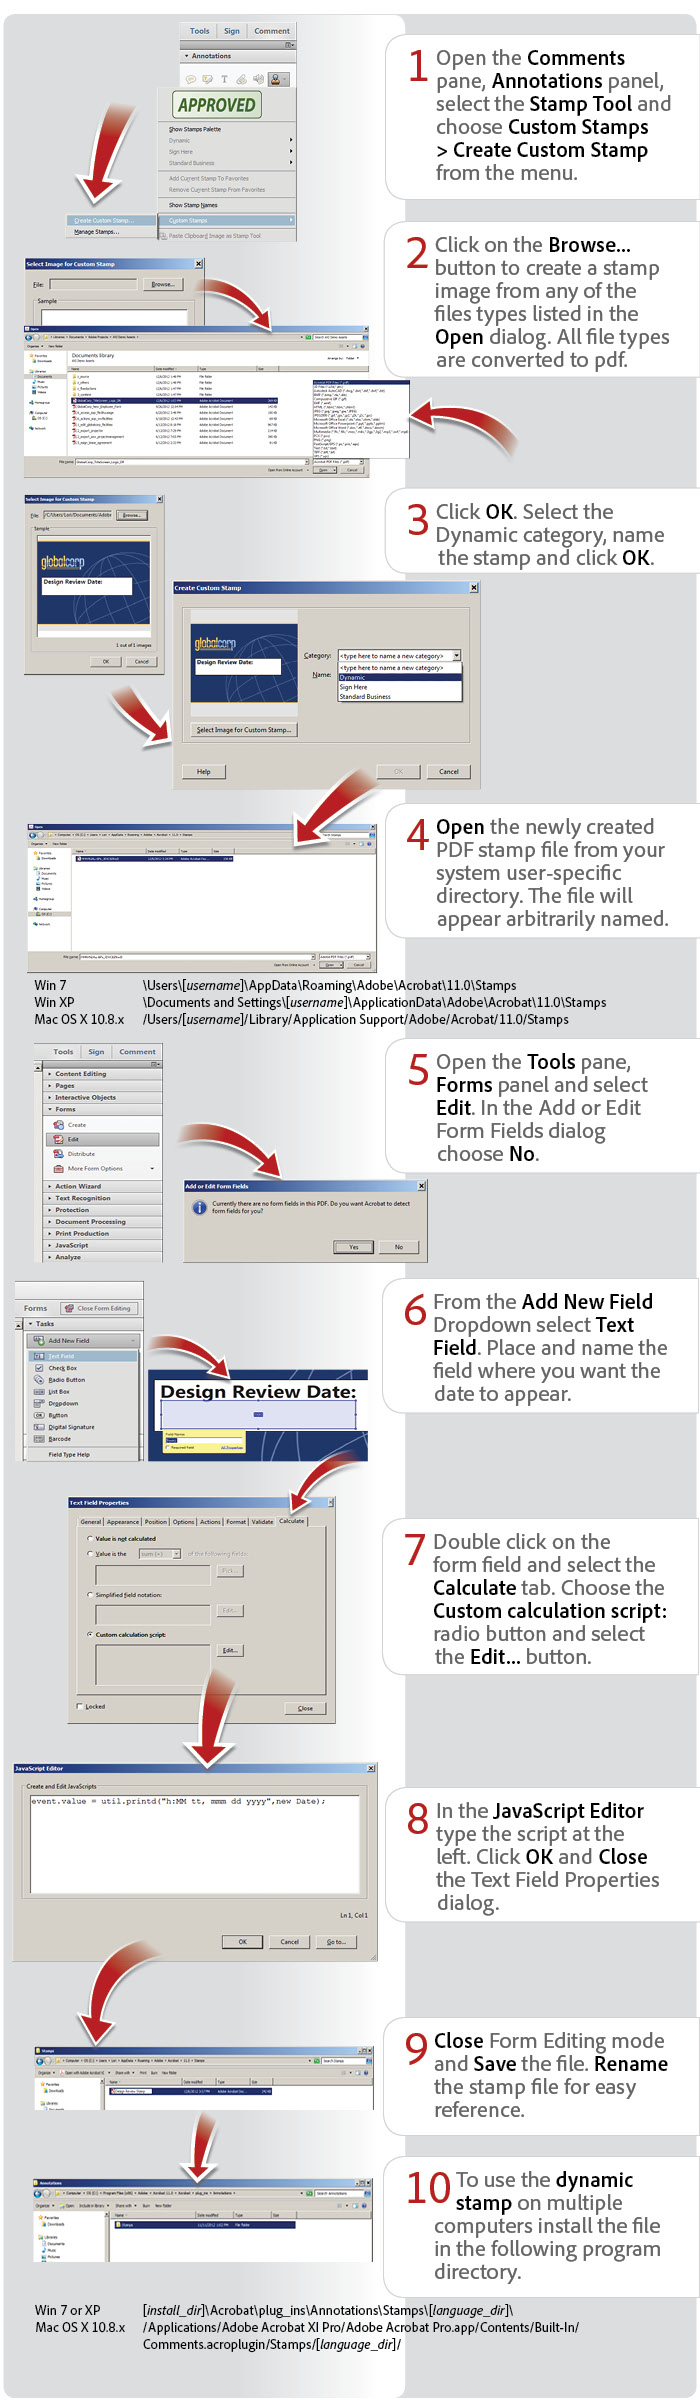 download dynamic stamps for adobe acrobat shop drawings